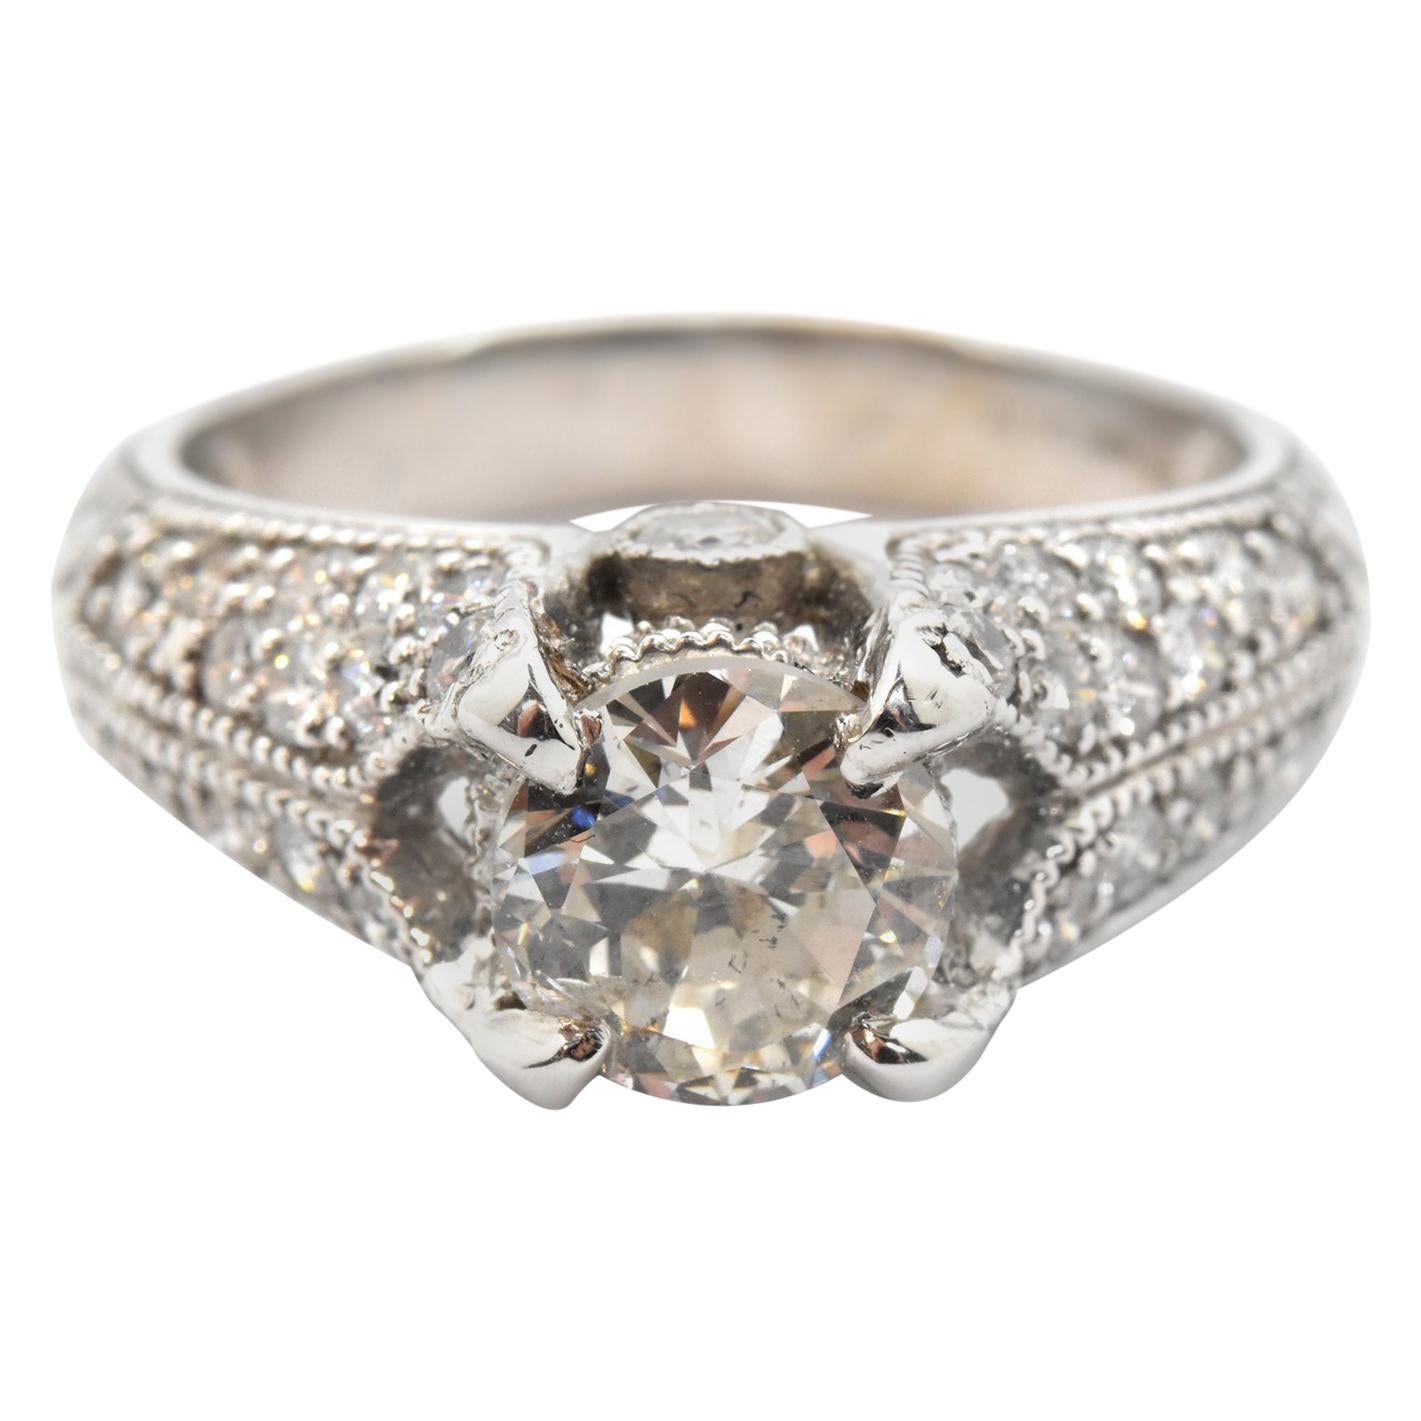 14 Karat White Gold and 1.38 Carat Round Diamond Ring with 0.75 Carat Accents